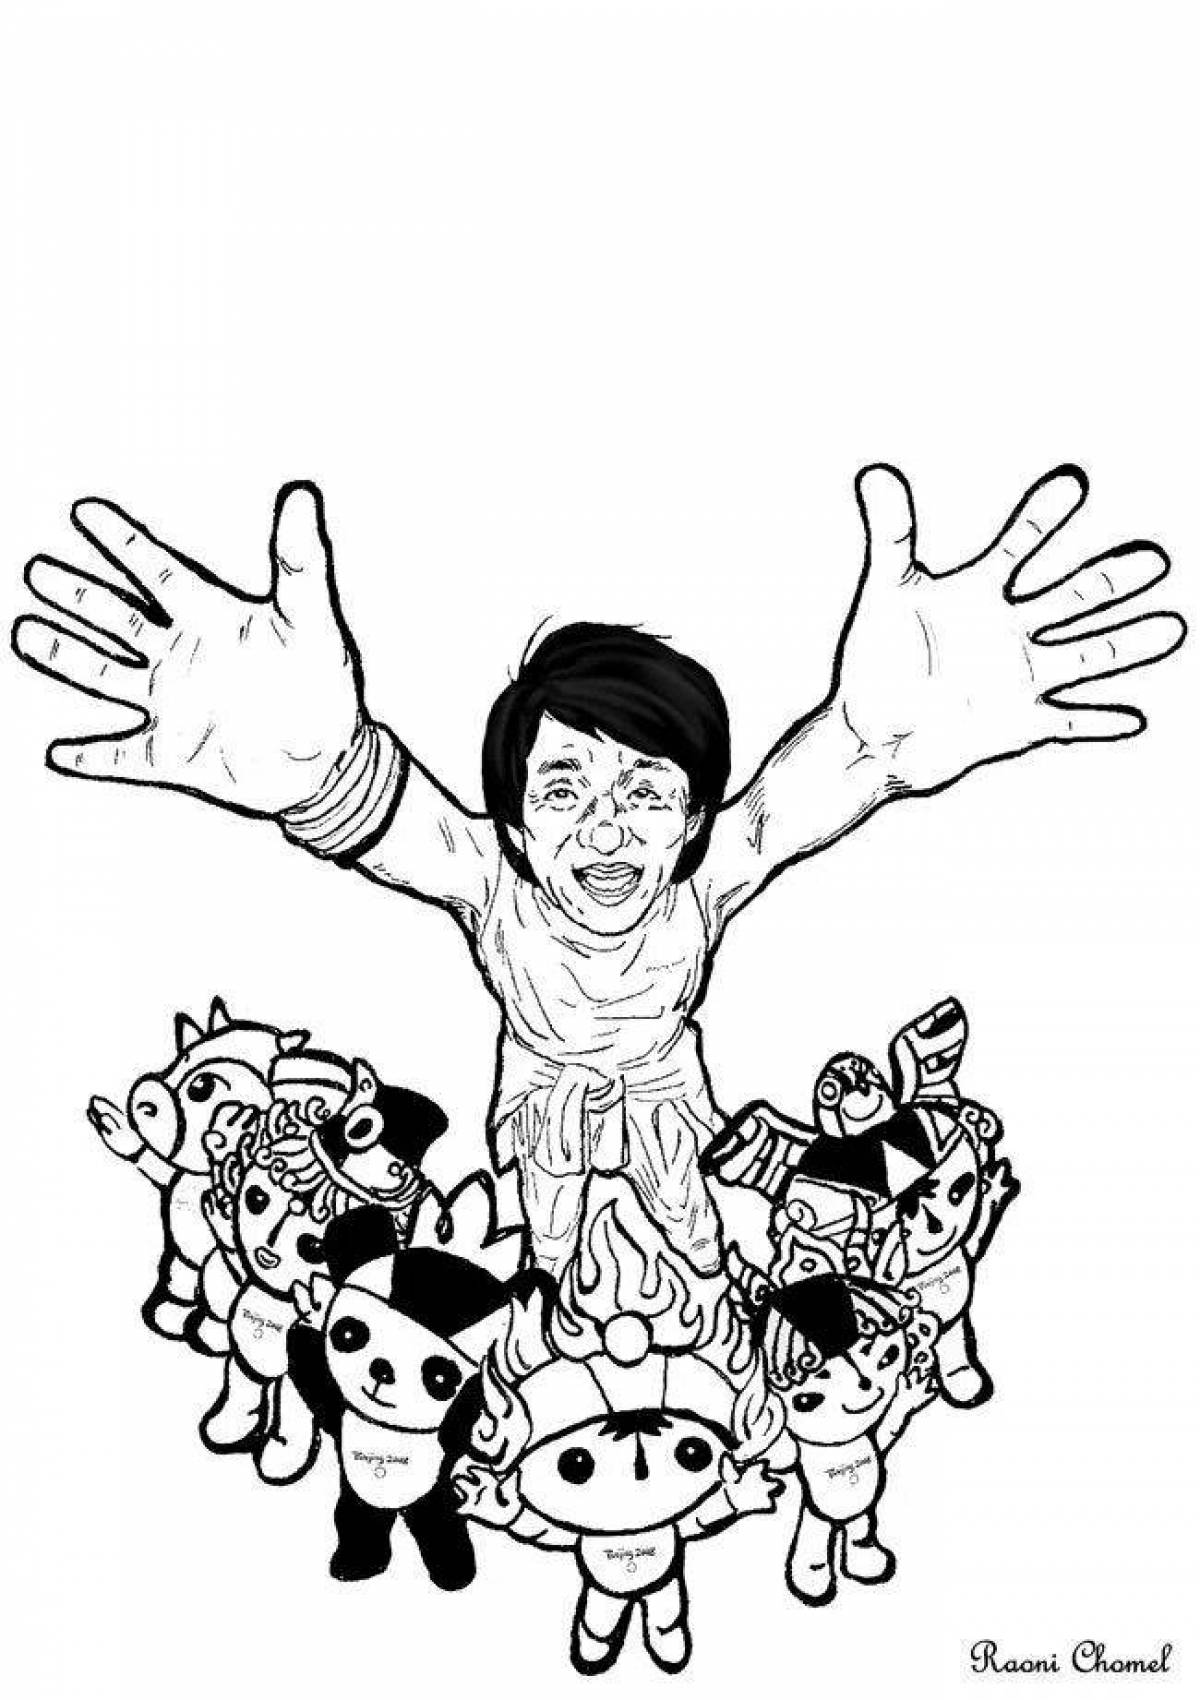 Jackie Chan's intriguing coloring book